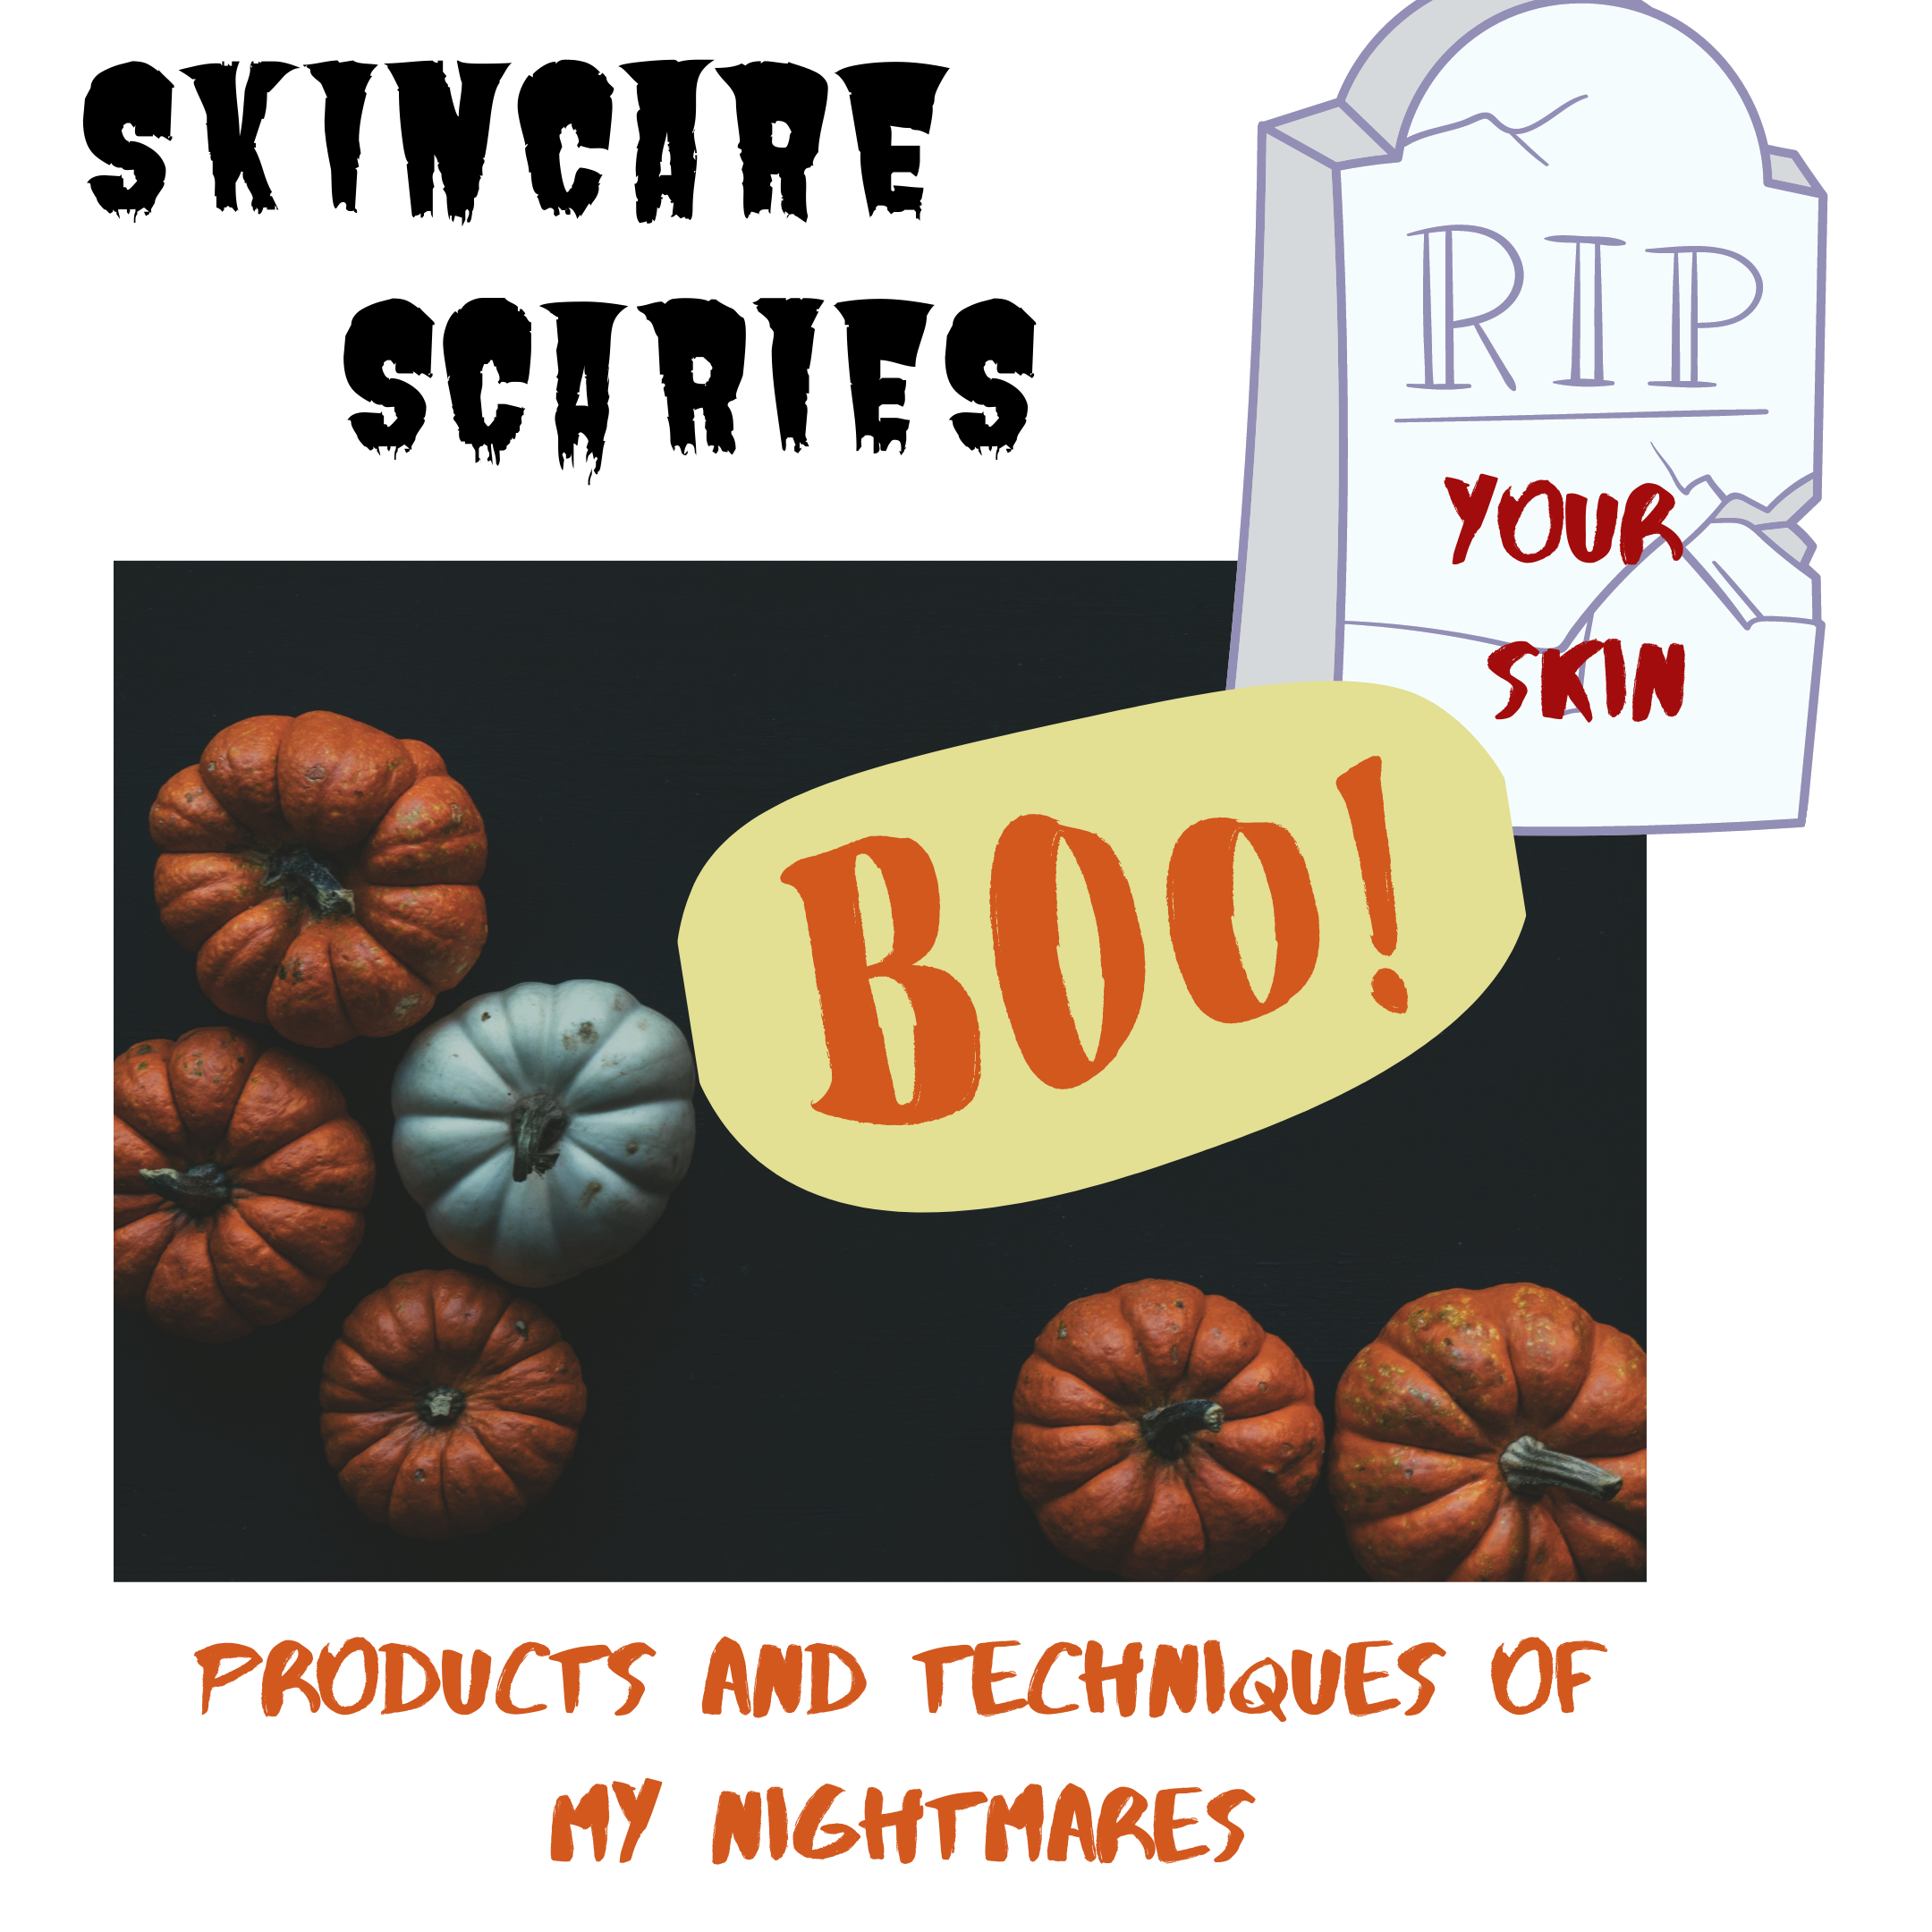 Skincare Spooky Stories! Scary Techniques to Haunt you this Halloween